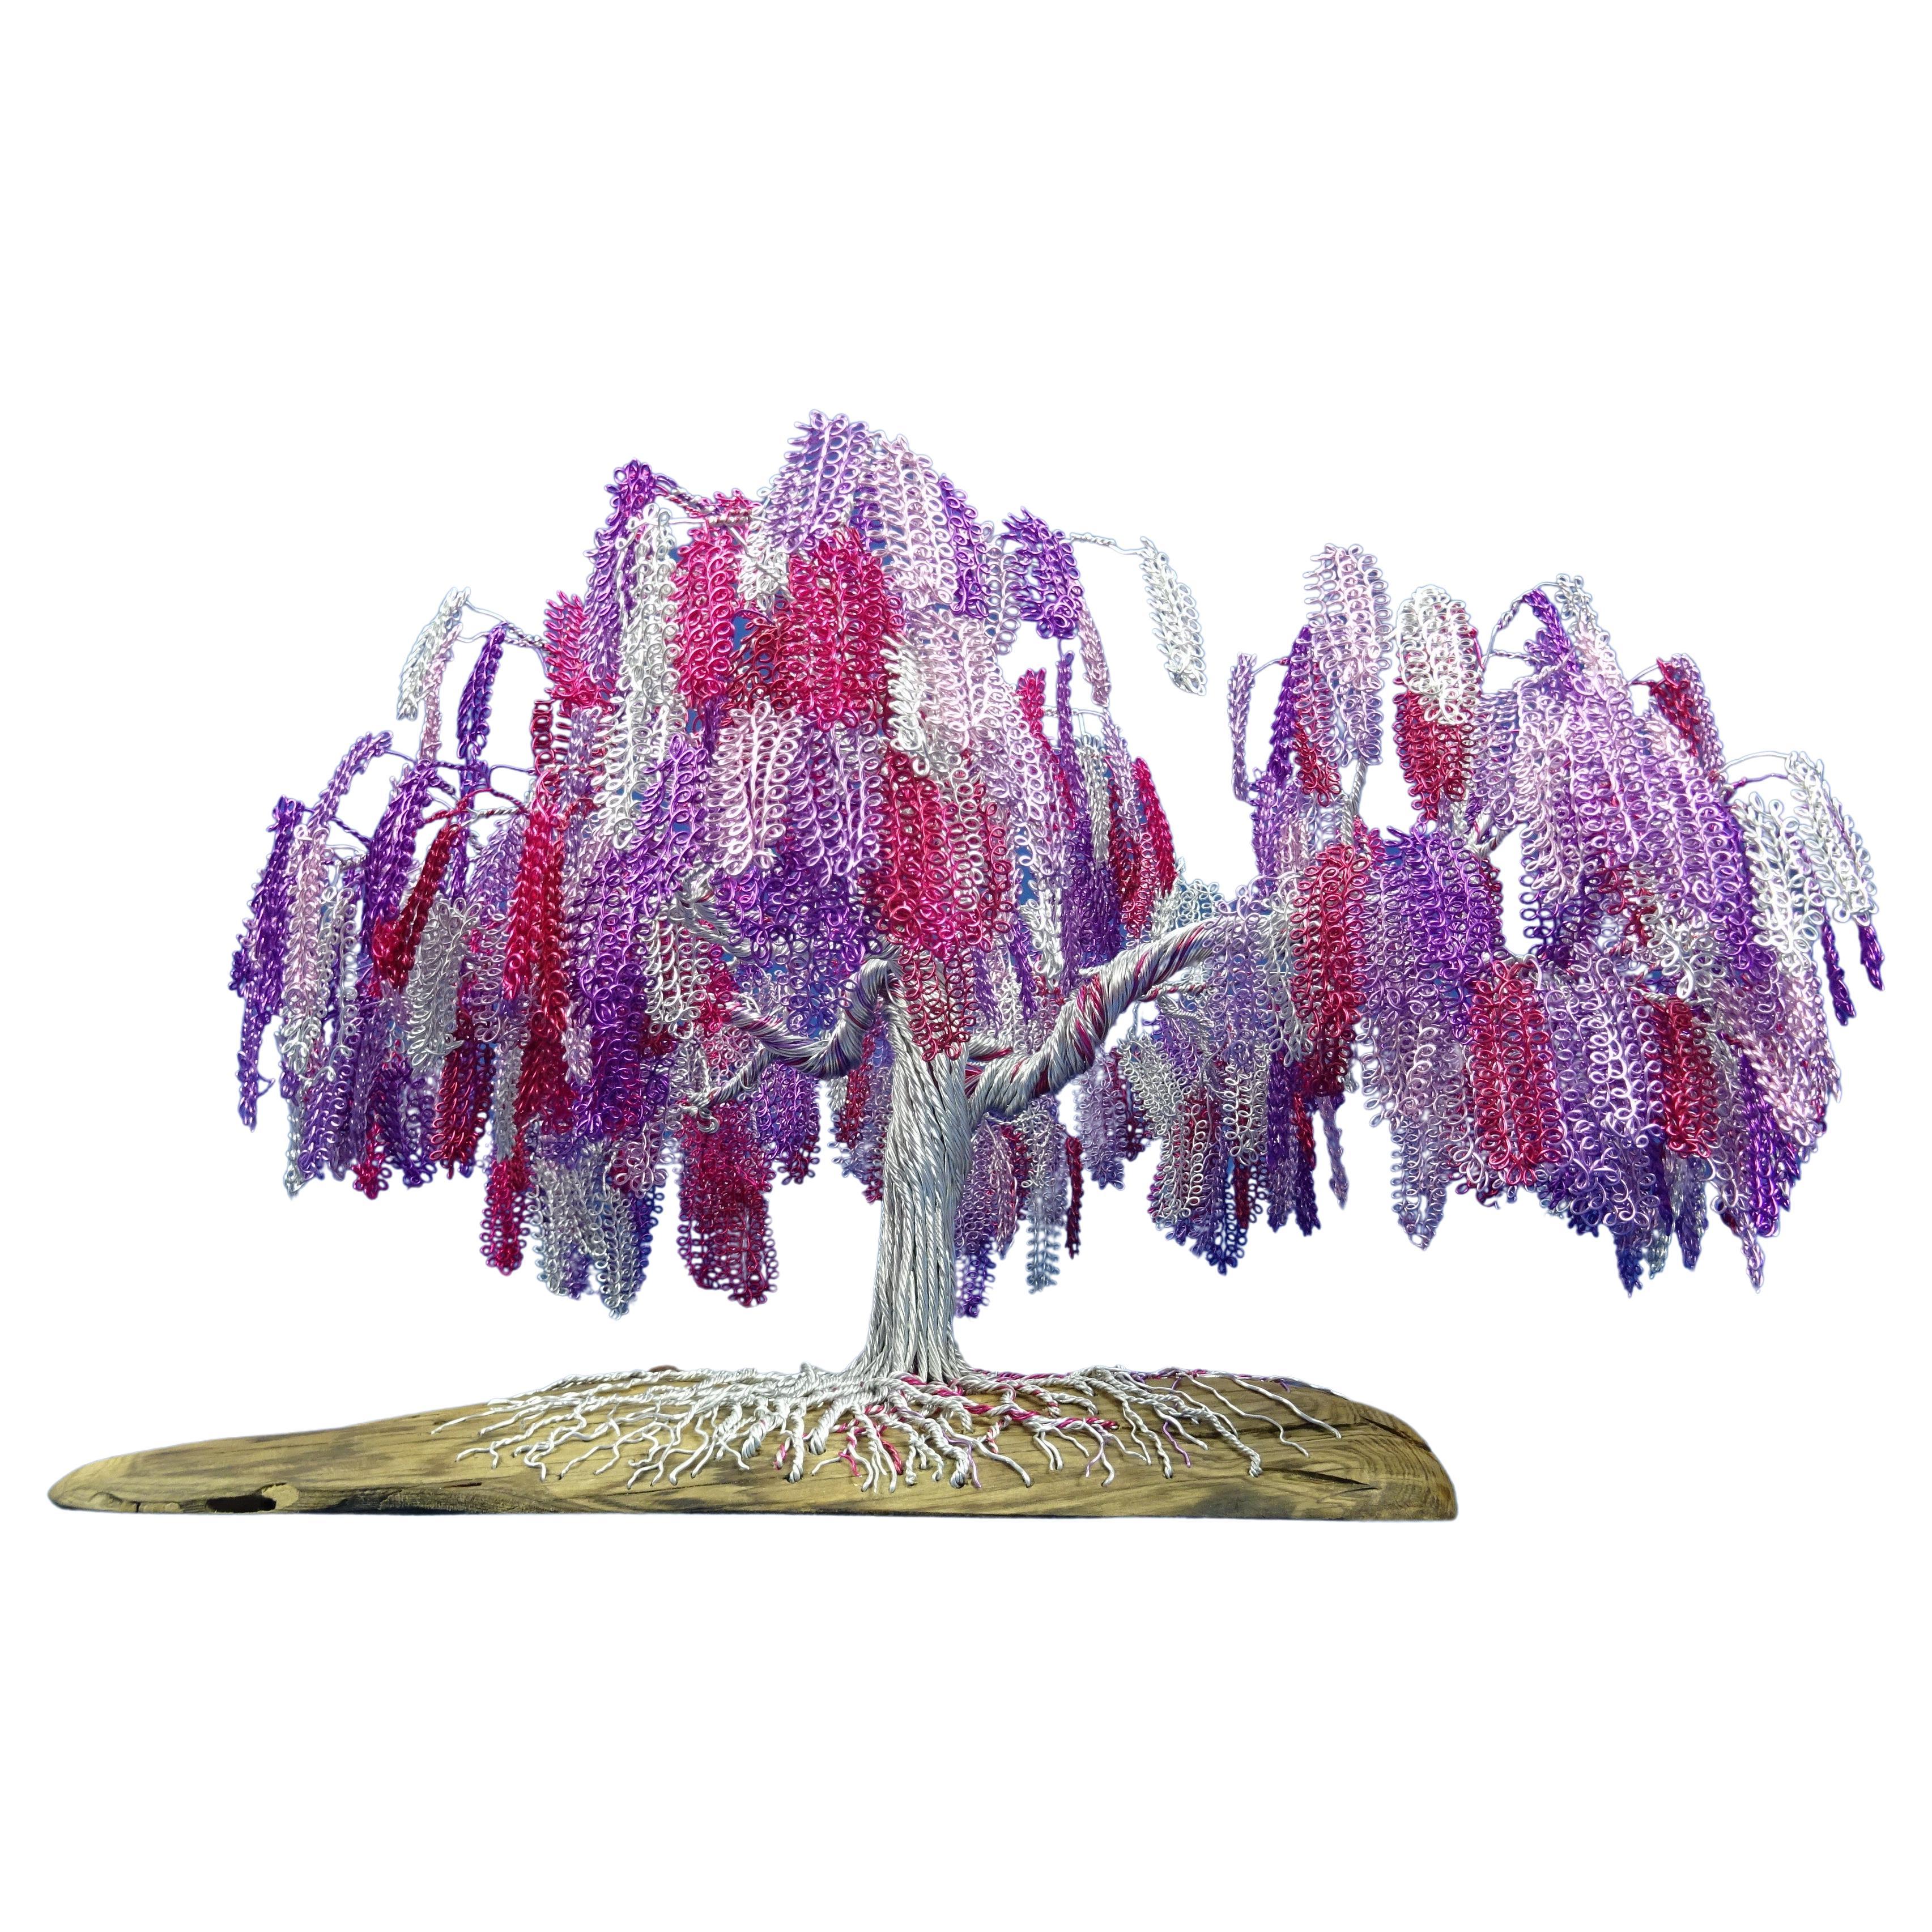 Award winning Bonsai "Wisteria falls", Handmade in Italy, Signed by the artist. For Sale